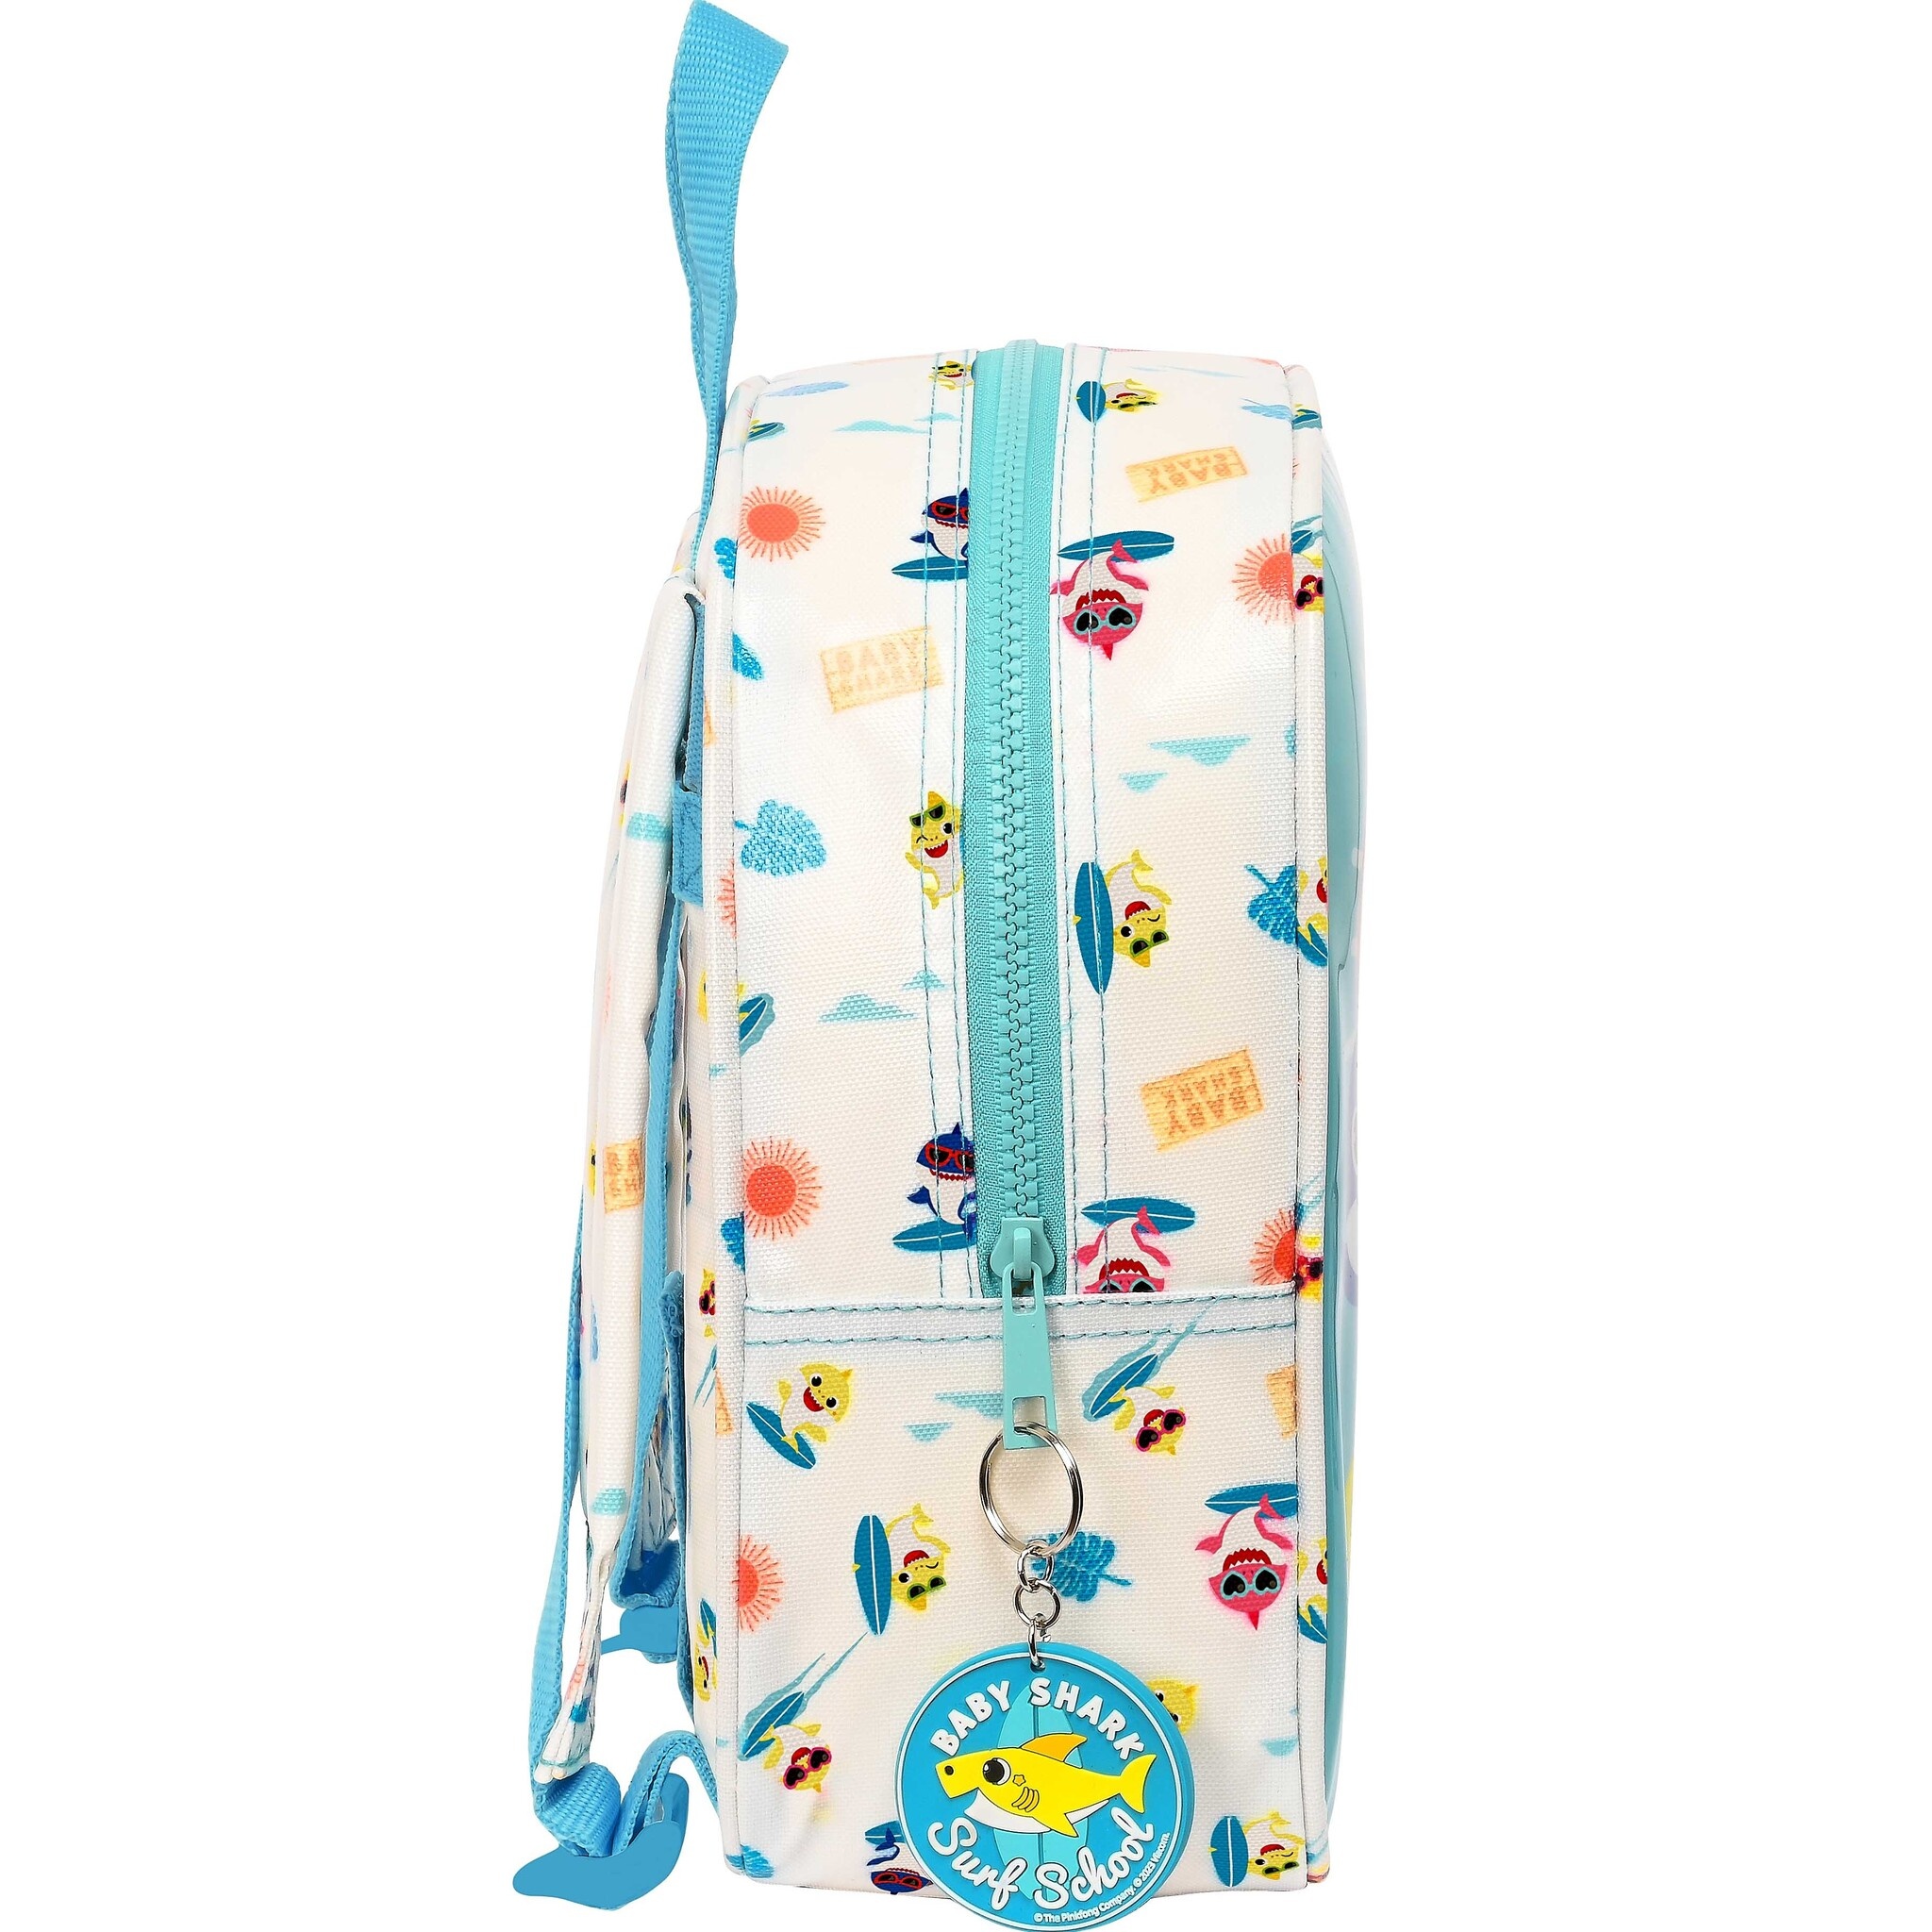 Baby Shark Toddler backpack, Surfing - 27 x 22 x 10 cm - Polyester